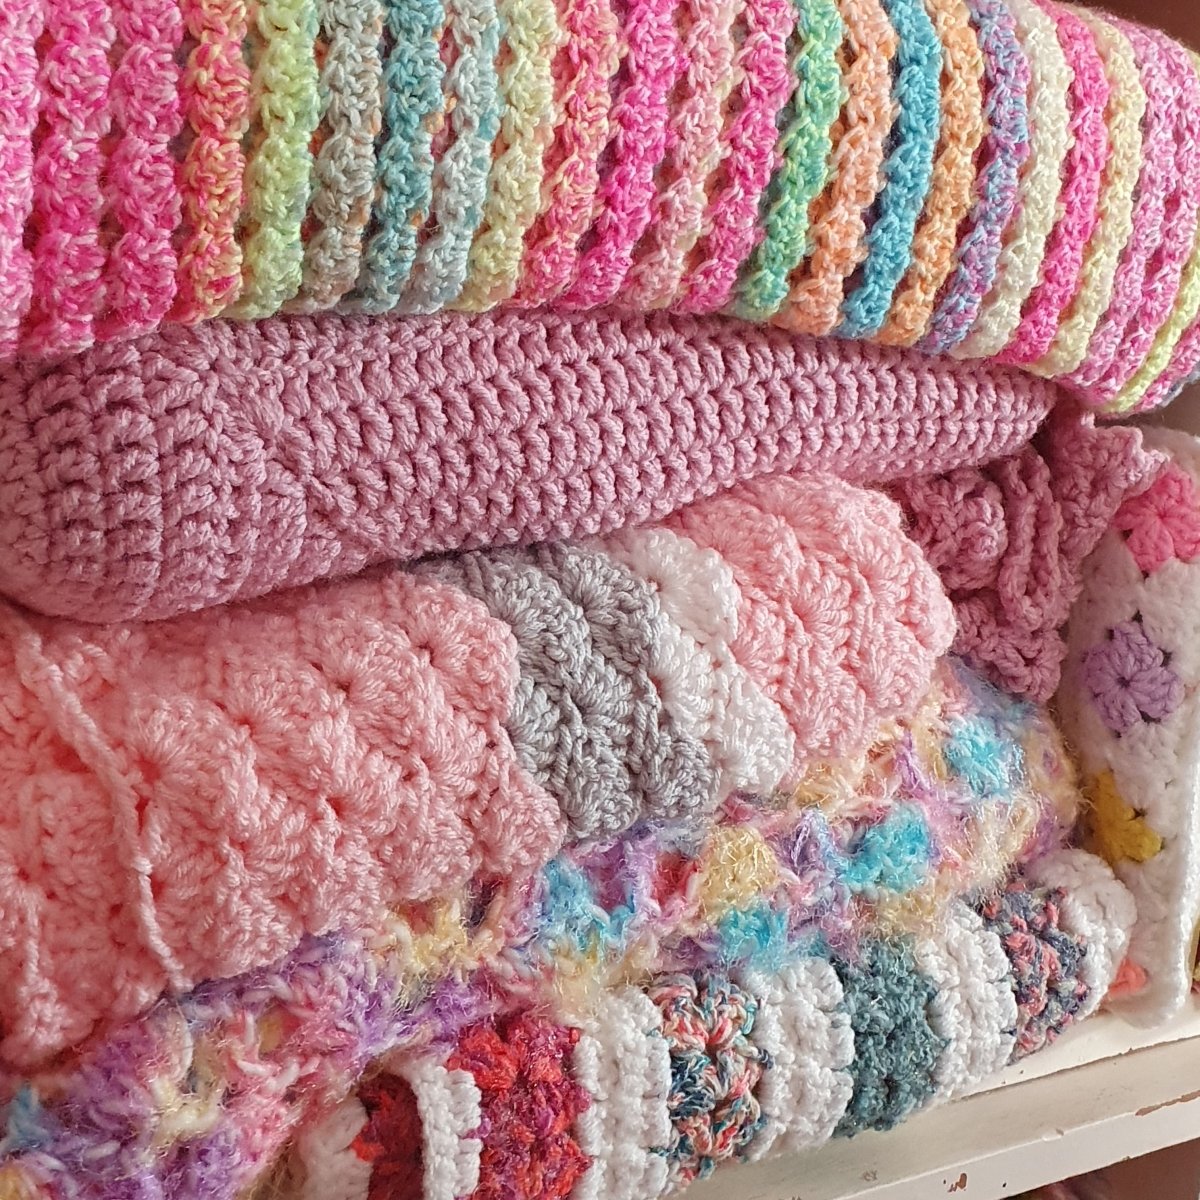 5 Easy and Quick Written Crochet Blanket Patterns for Beginners - with Video Tutorials - Secret Yarnery